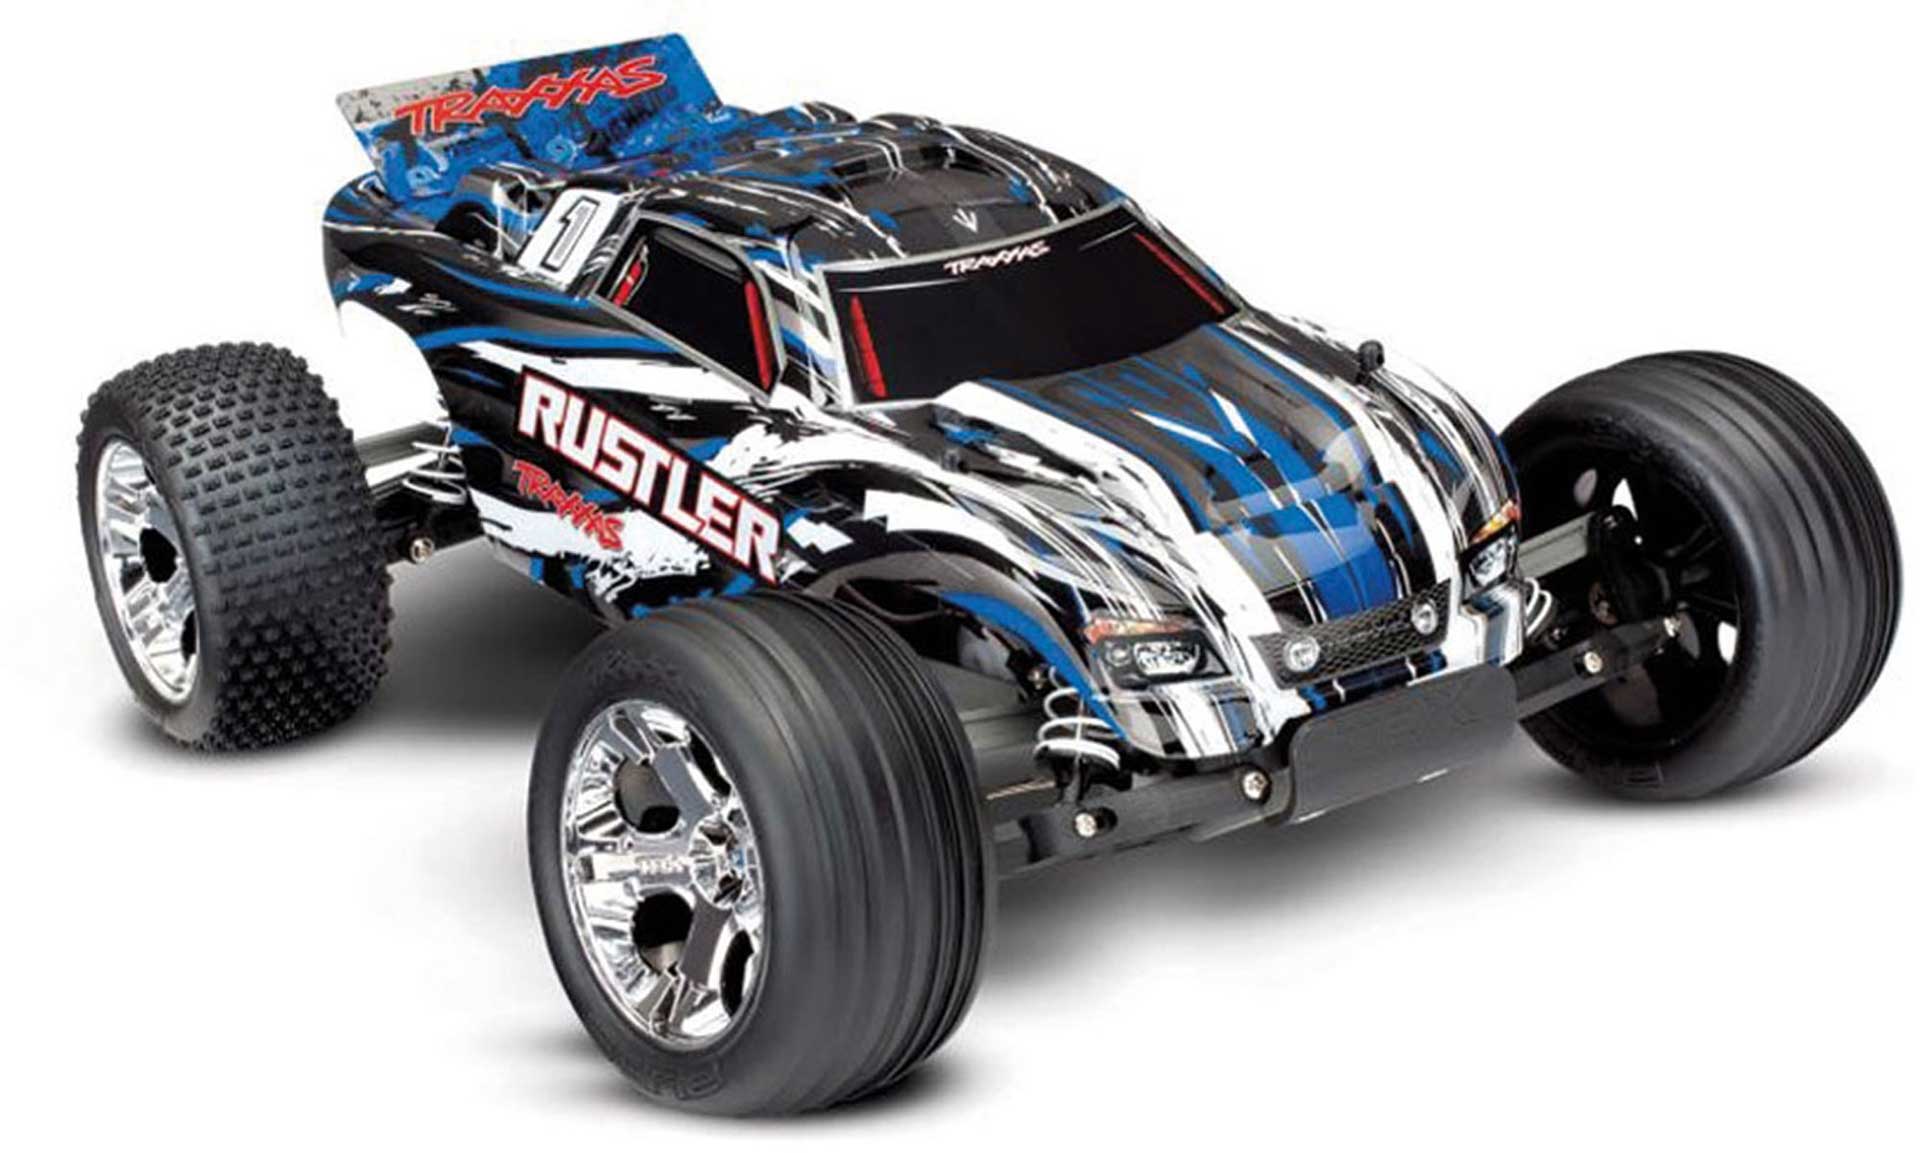 TRAXXAS RUSTLER BLUE MONSTER TRUCK BRUSHED 1/10 2WD RTR + 12V CHARGER AND BATTERY